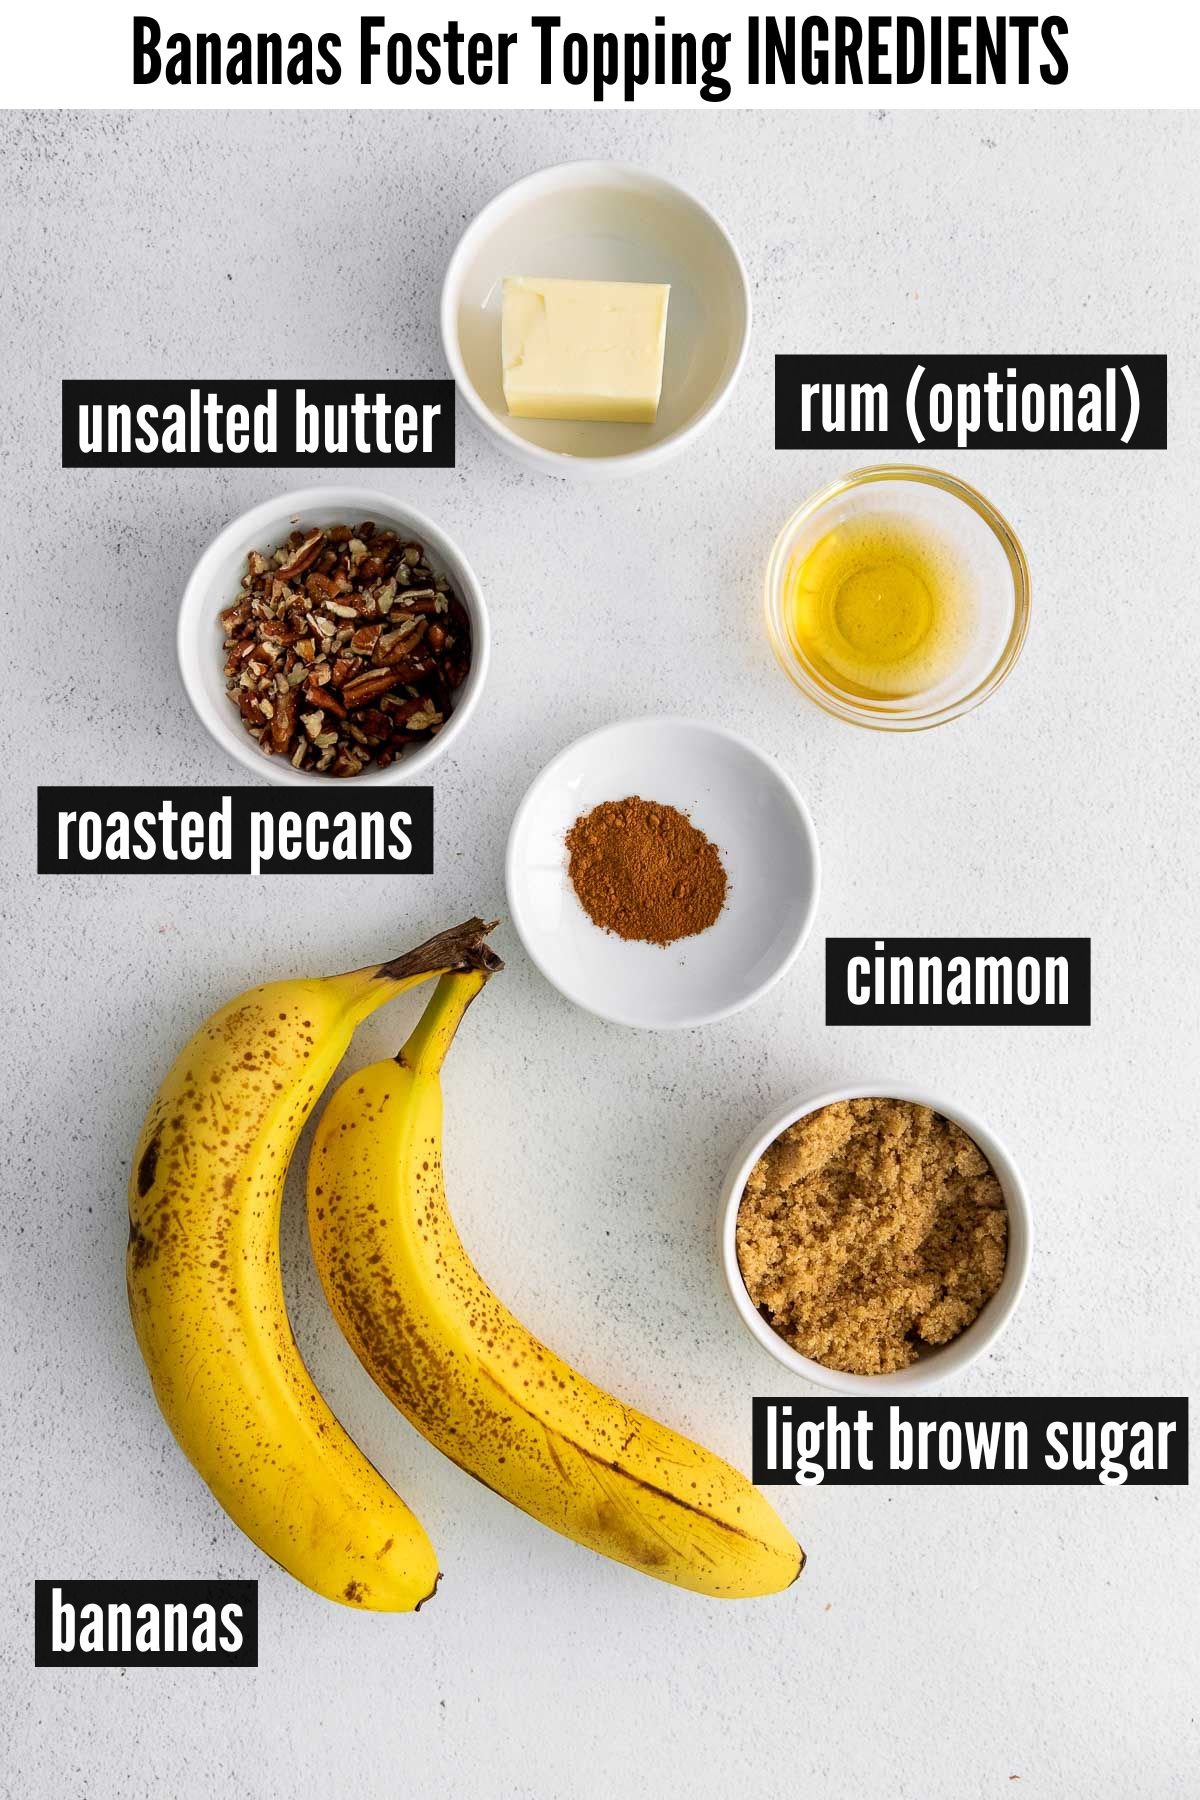 bananas foster topping labelled ingredients.